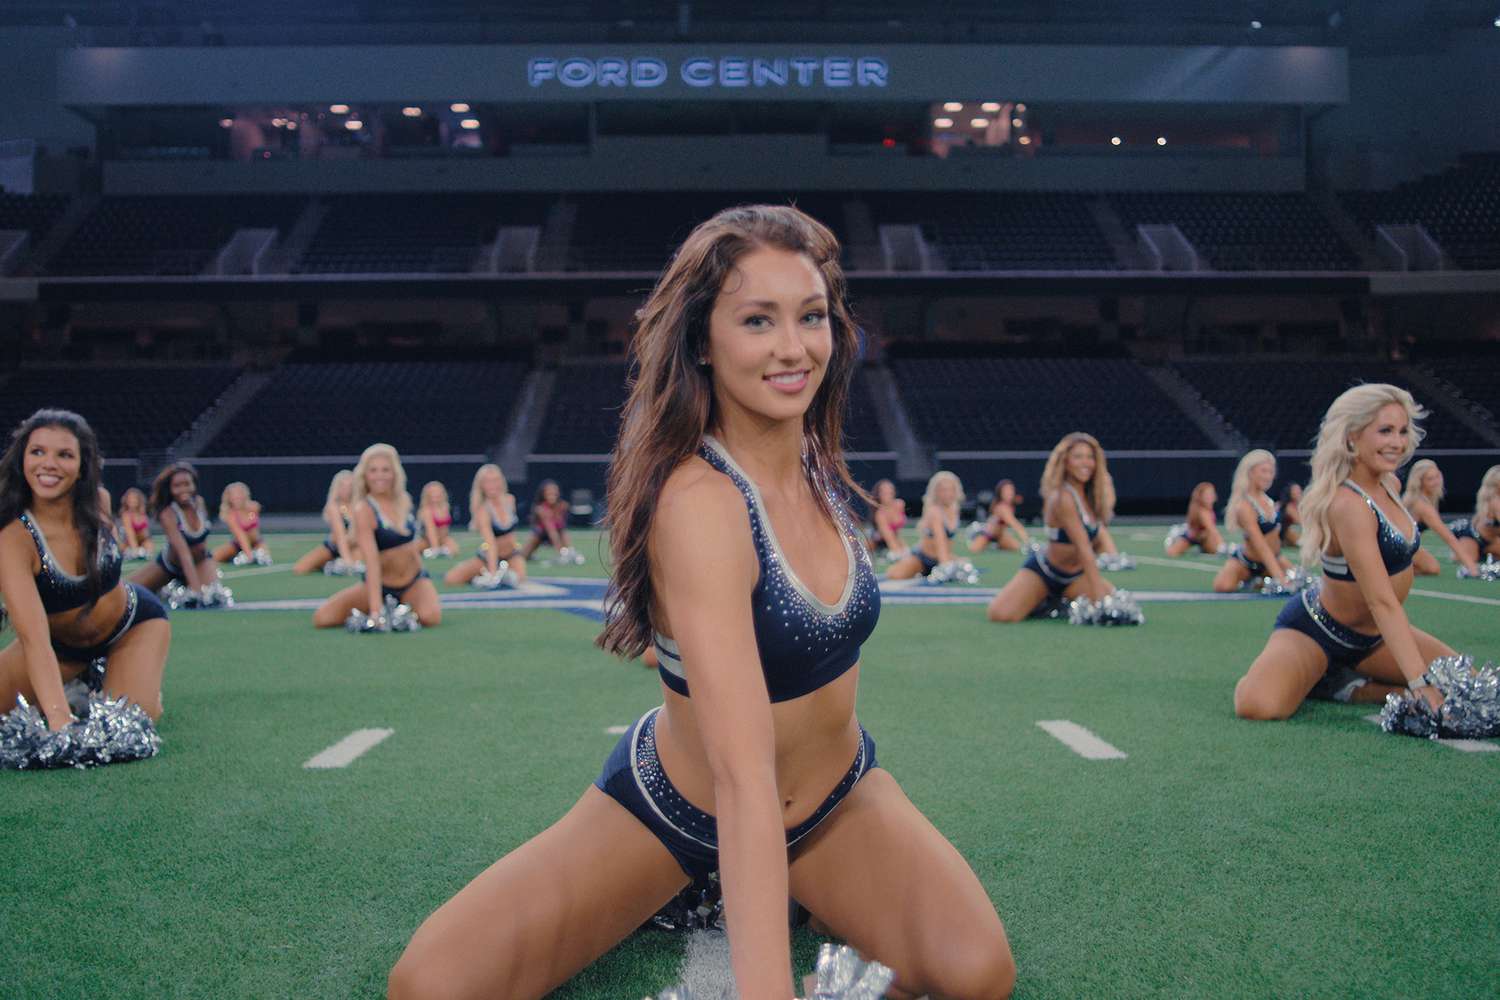 Will There Be an 'America's Sweethearts: Dallas Cowboys Cheerleaders' Season 2? What We Know So Far